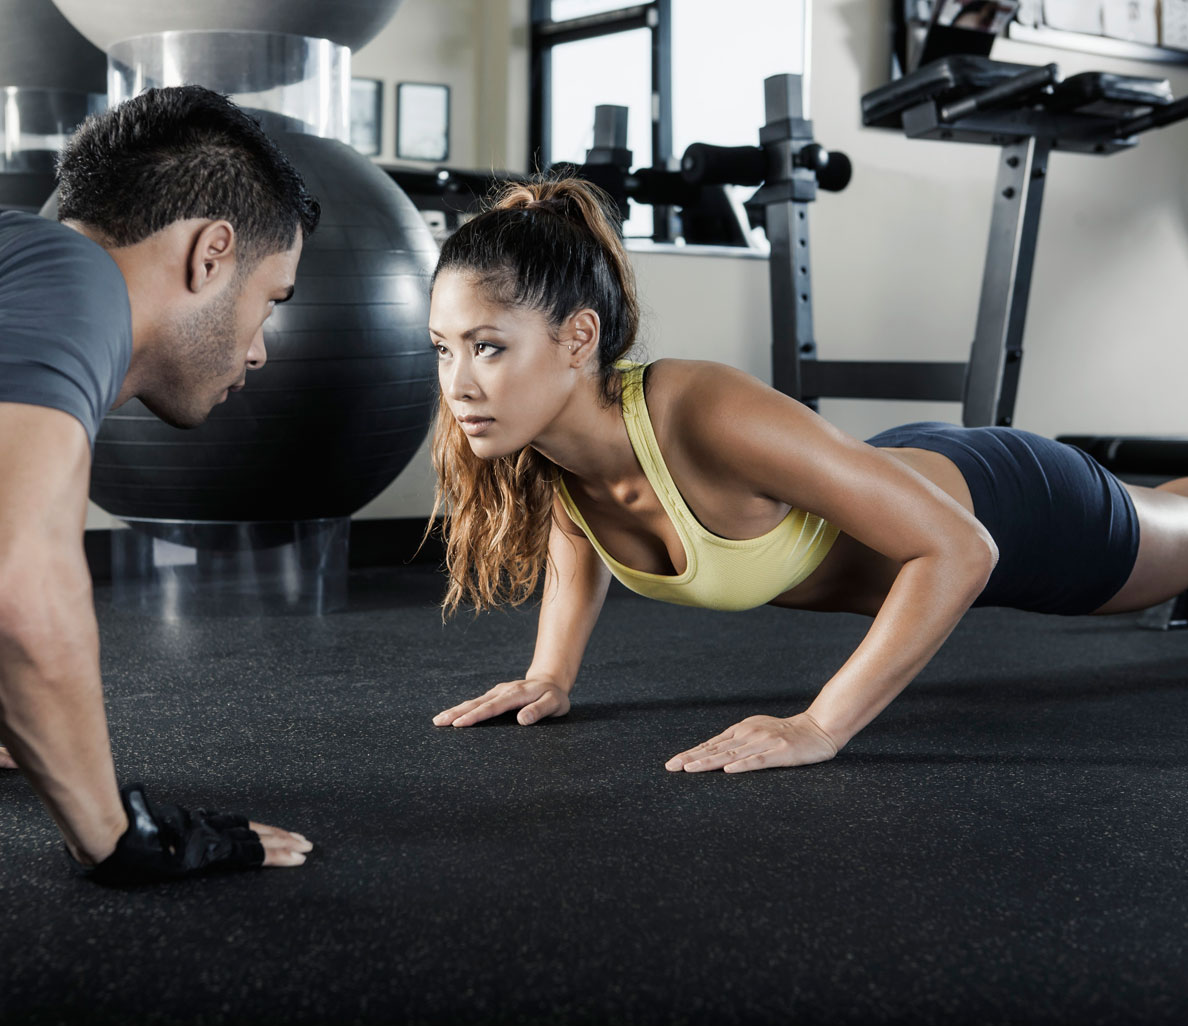 How to pick up women at the gym, according to women pic